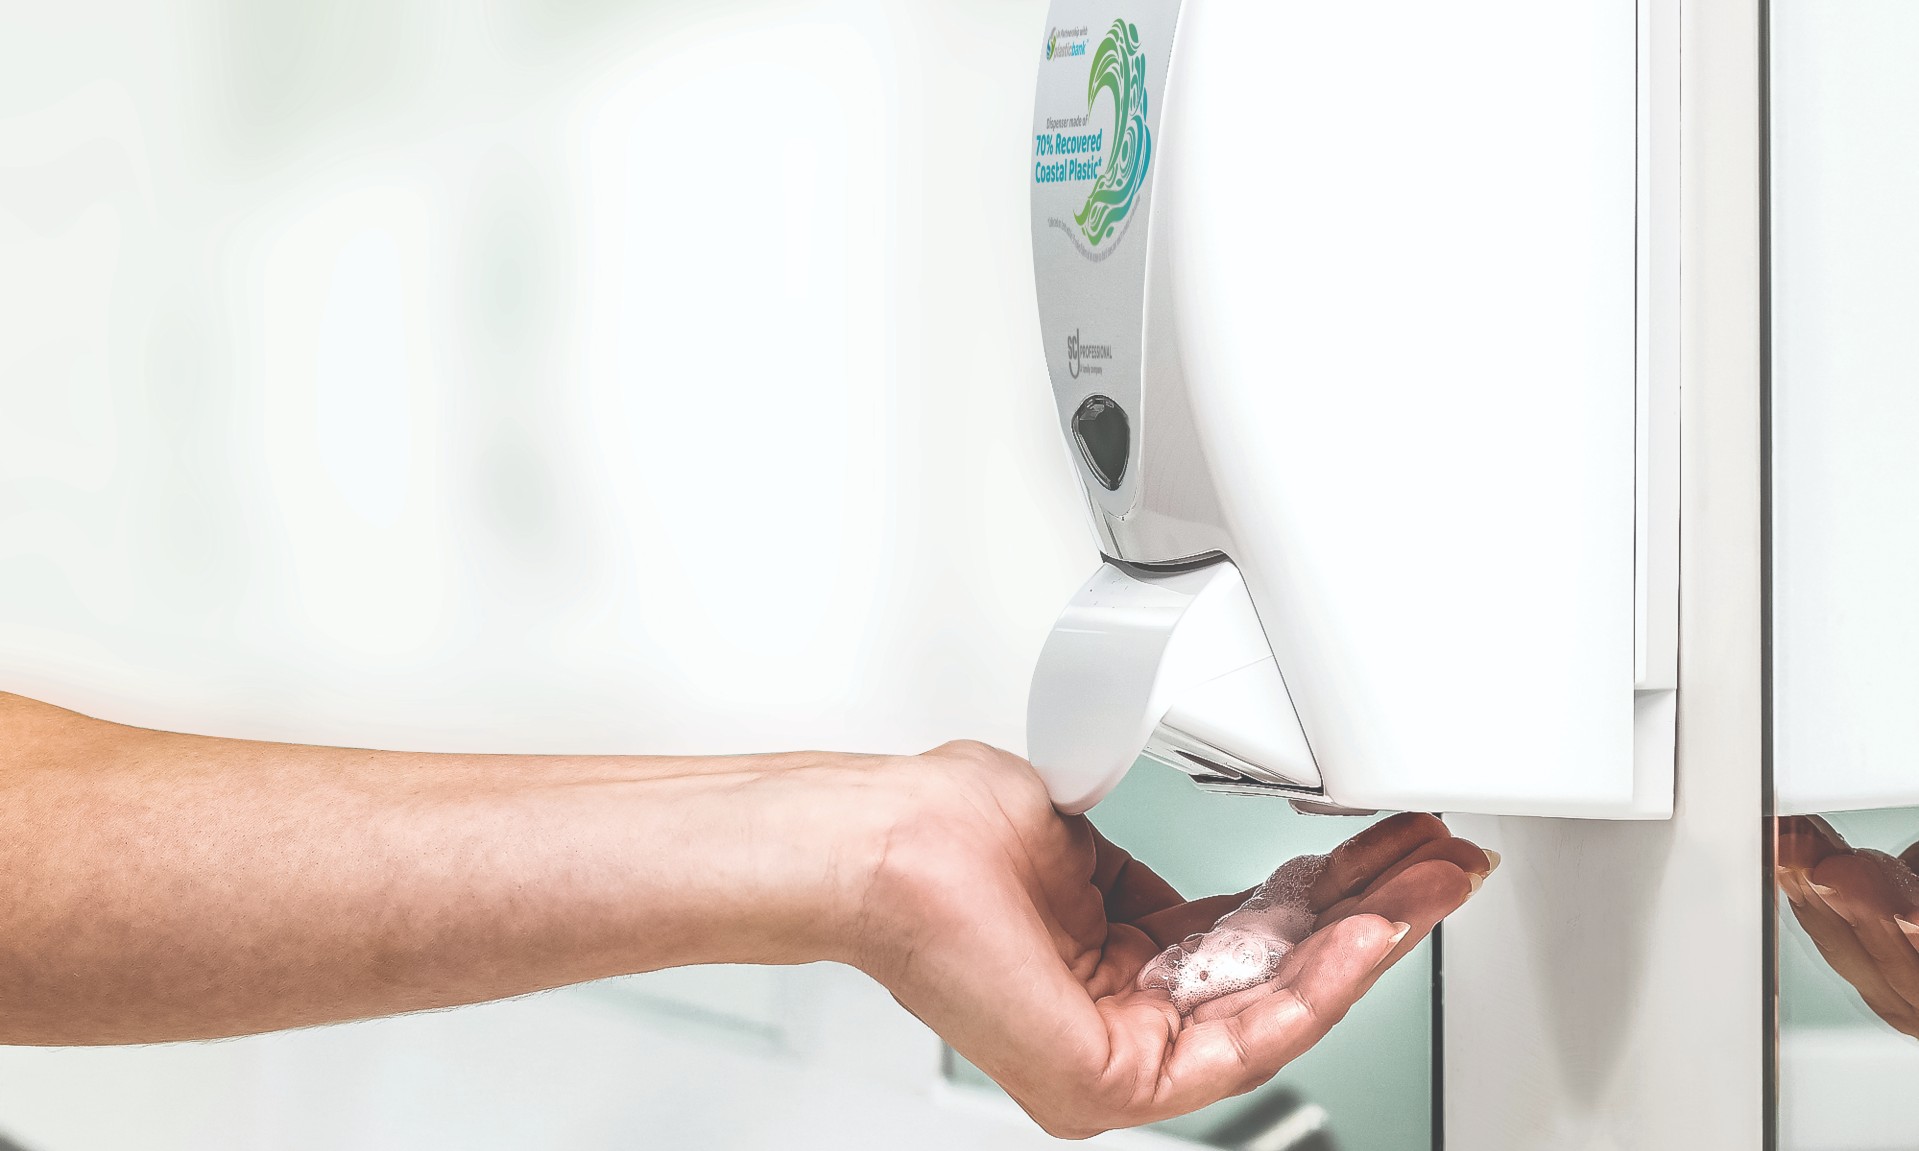 SC Johnson Professional launches new washroom soap dispenser made from 70% recovered coastal plastic